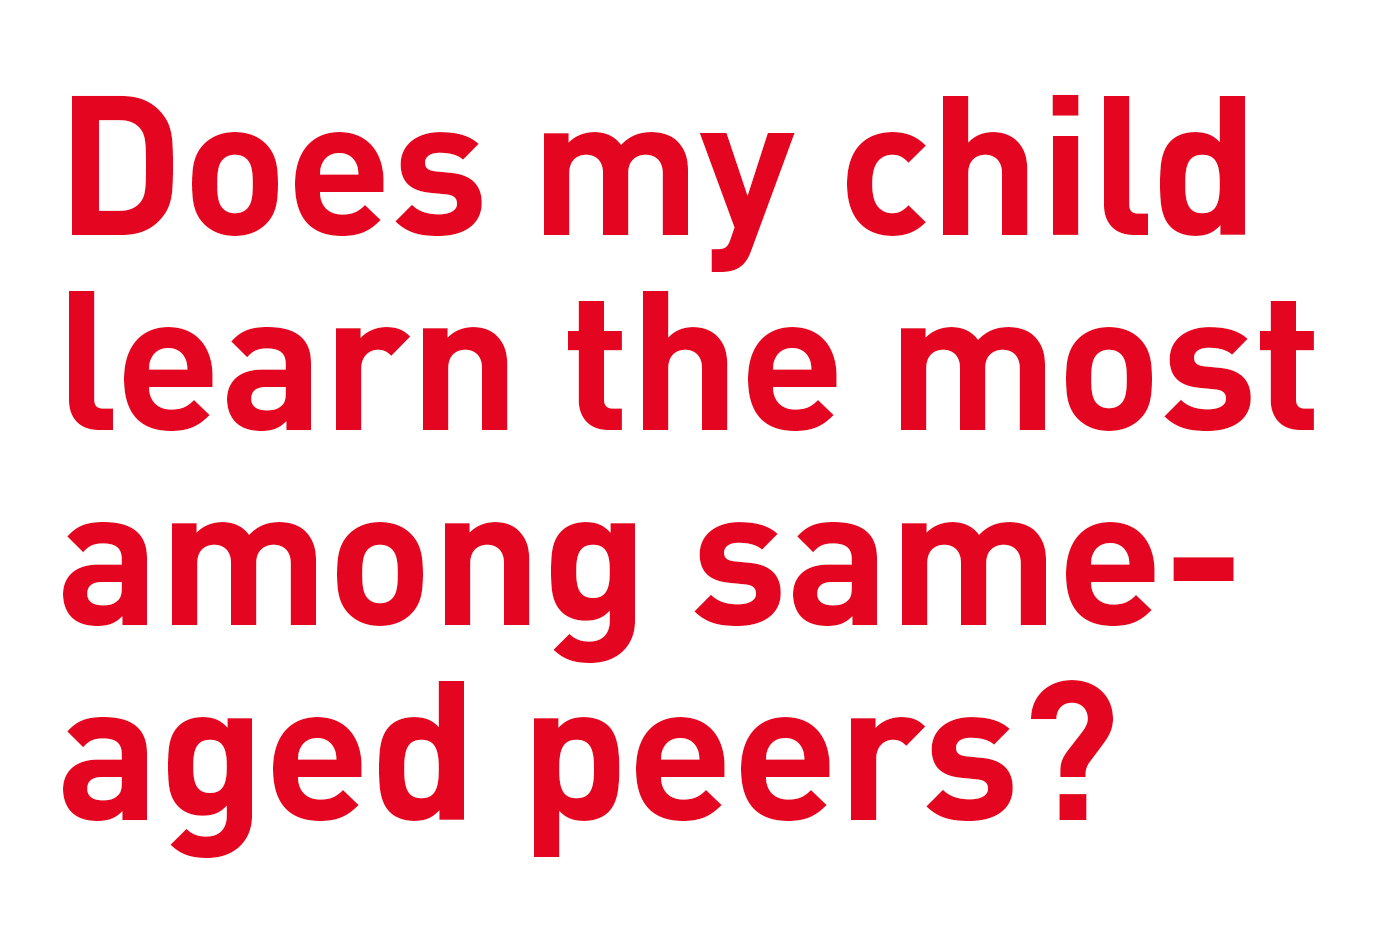 Does my child learn the most among same-aged peers? - Lipschule